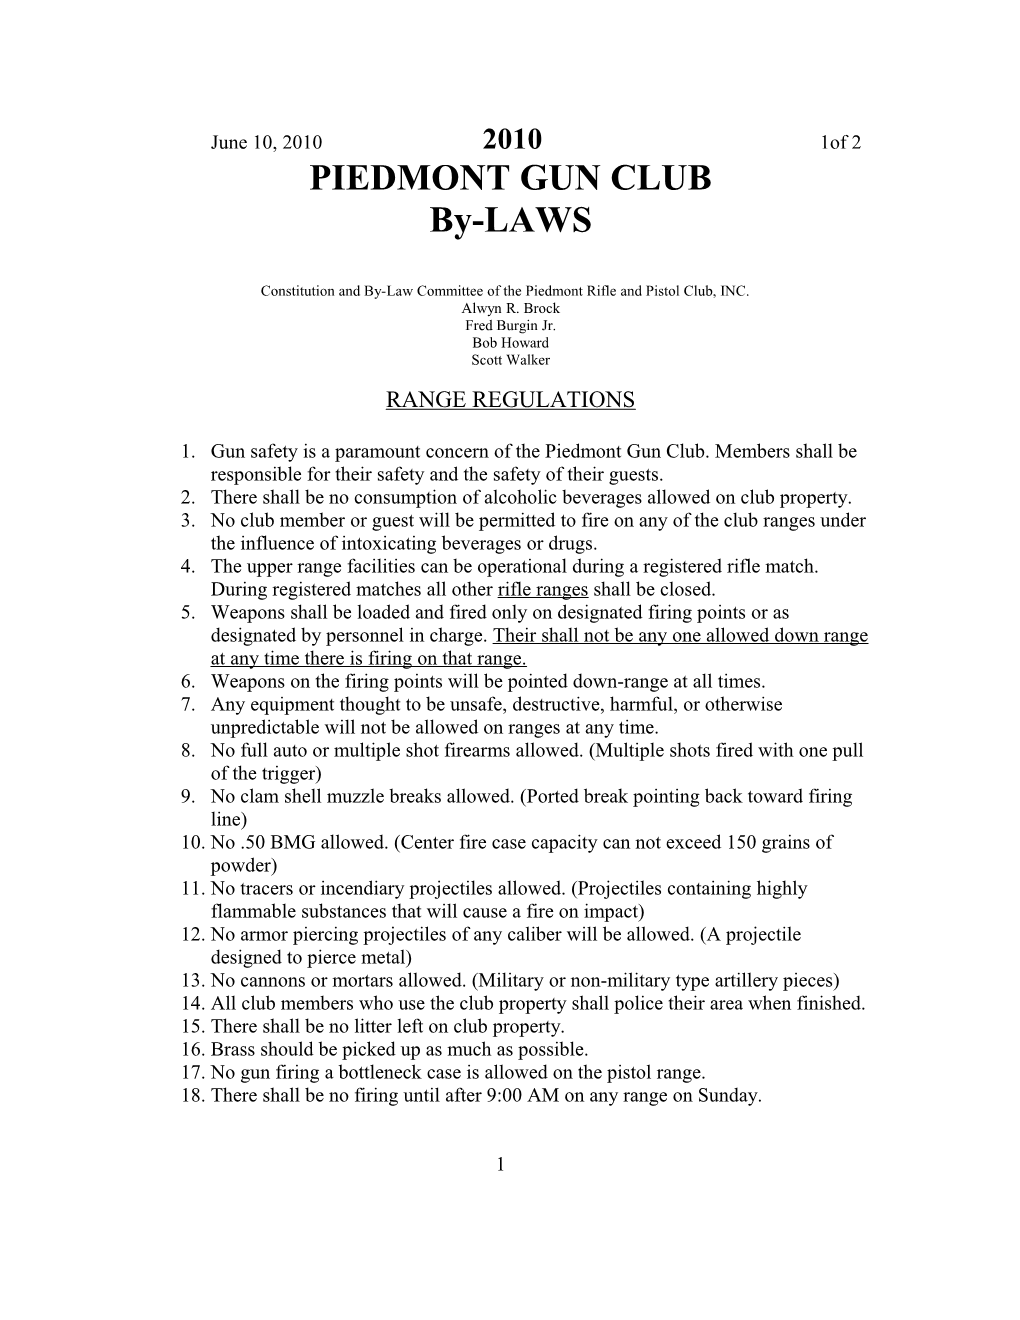 Constitution and By-Law Committee of the Piedmont Rifle and Pistol Club, INC